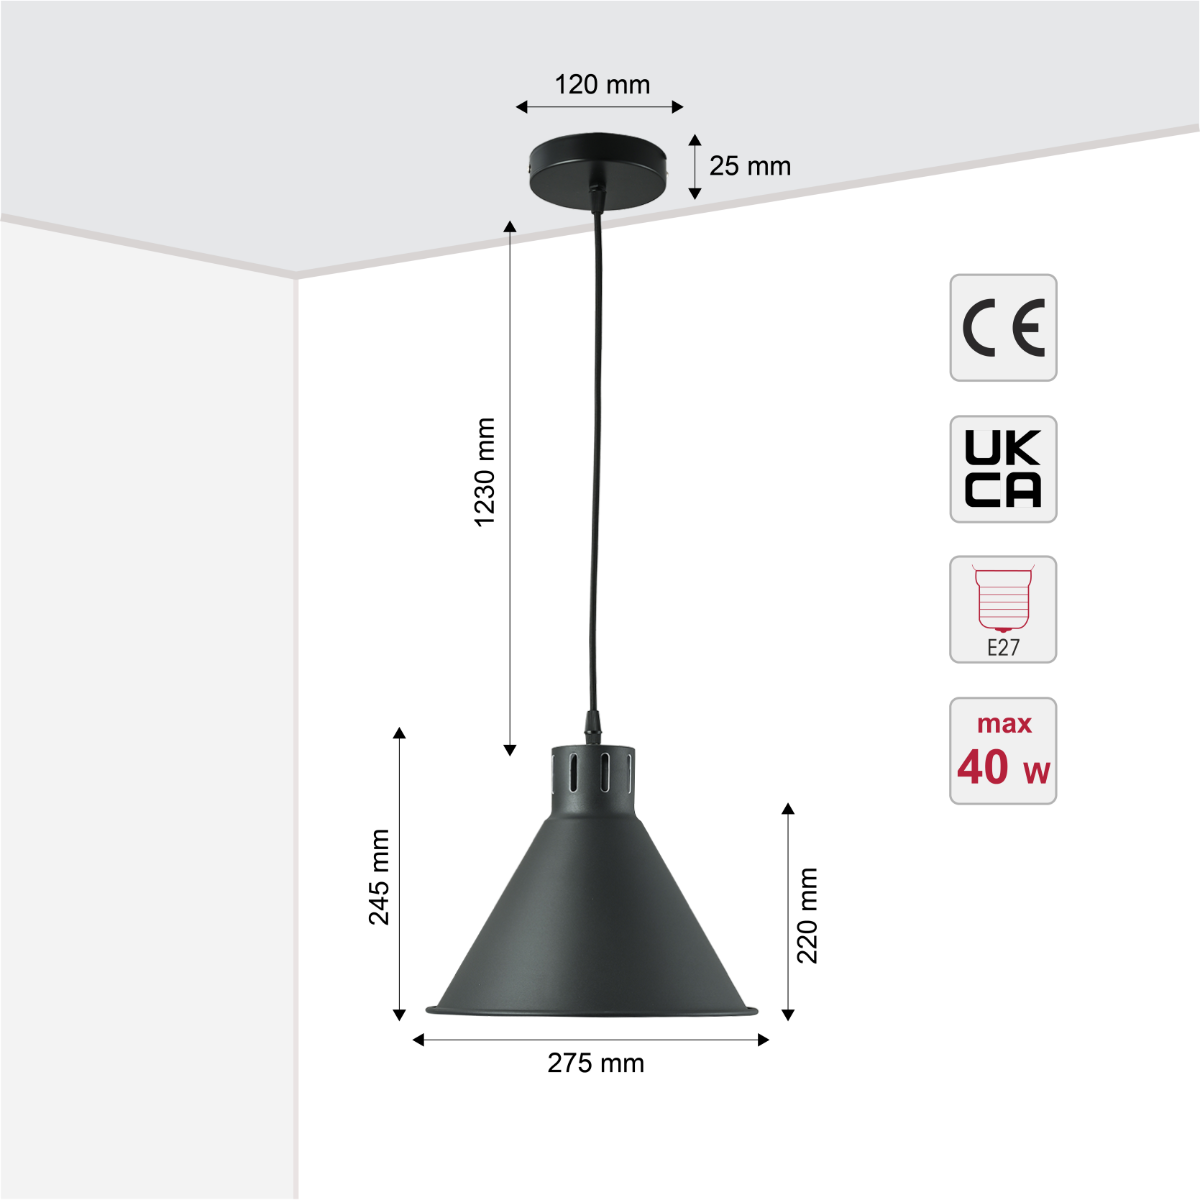 Size and certifications of  Sleek Industrial Cone Pendant Light 150-18435